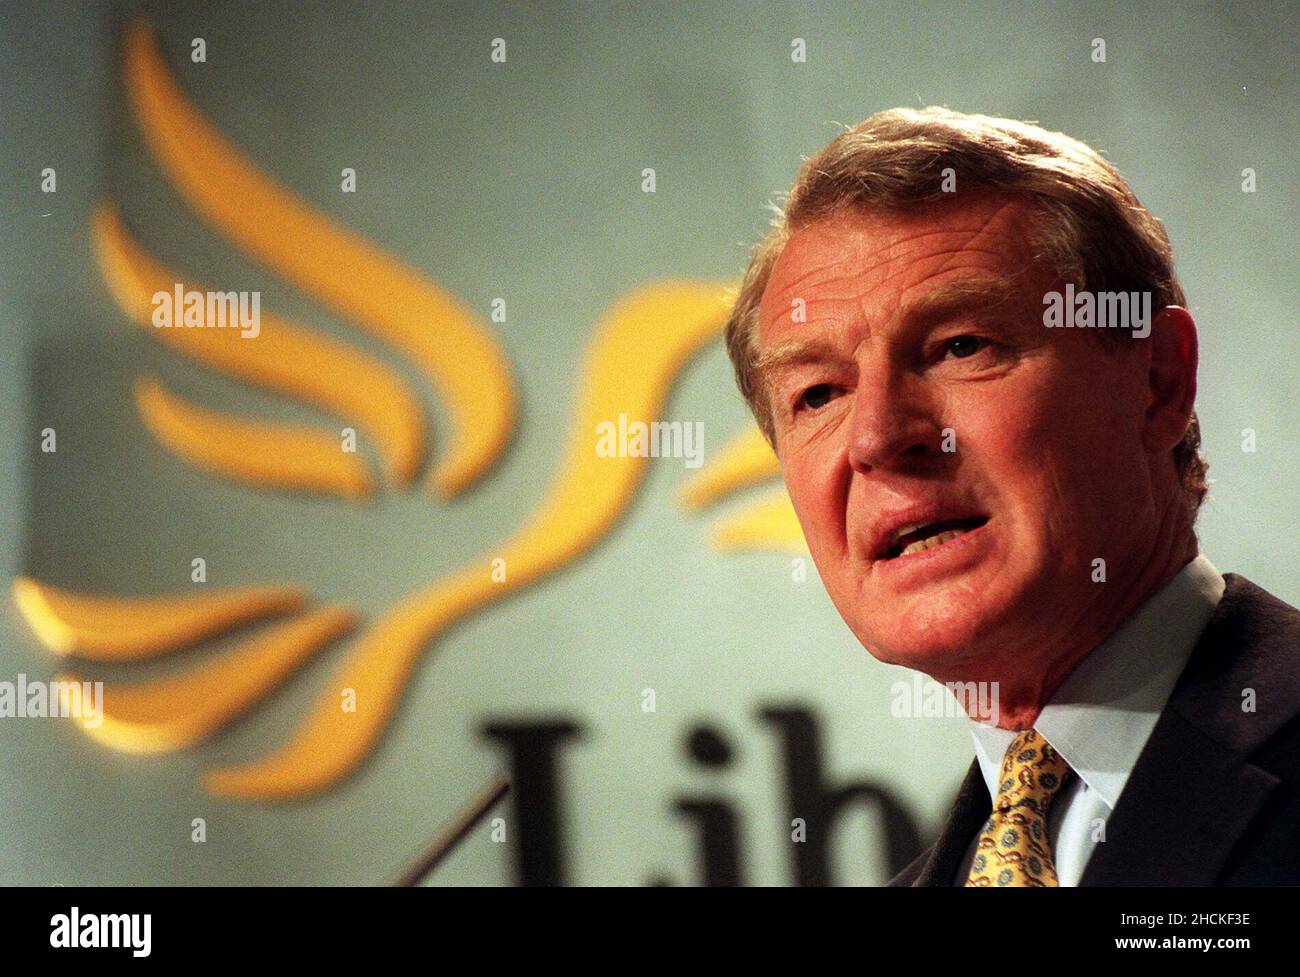 File photo dated 04/04/97 of Liberal Democratic leader Paddy Ashdown at the party's election manifesto launch. Mr Ashdown wanted to redesign the House of Commons as a symbol of his party's joint reform agenda with New Labour, according to newly-released official papers. Files released by the National Archives show Mr Ashdown was keen to expand co-operation between the two parties - dubbed 'the project' - following Tony Blair’s landslide general victory in 1997. Issue date: Thursday December 30, 2021. Stock Photo